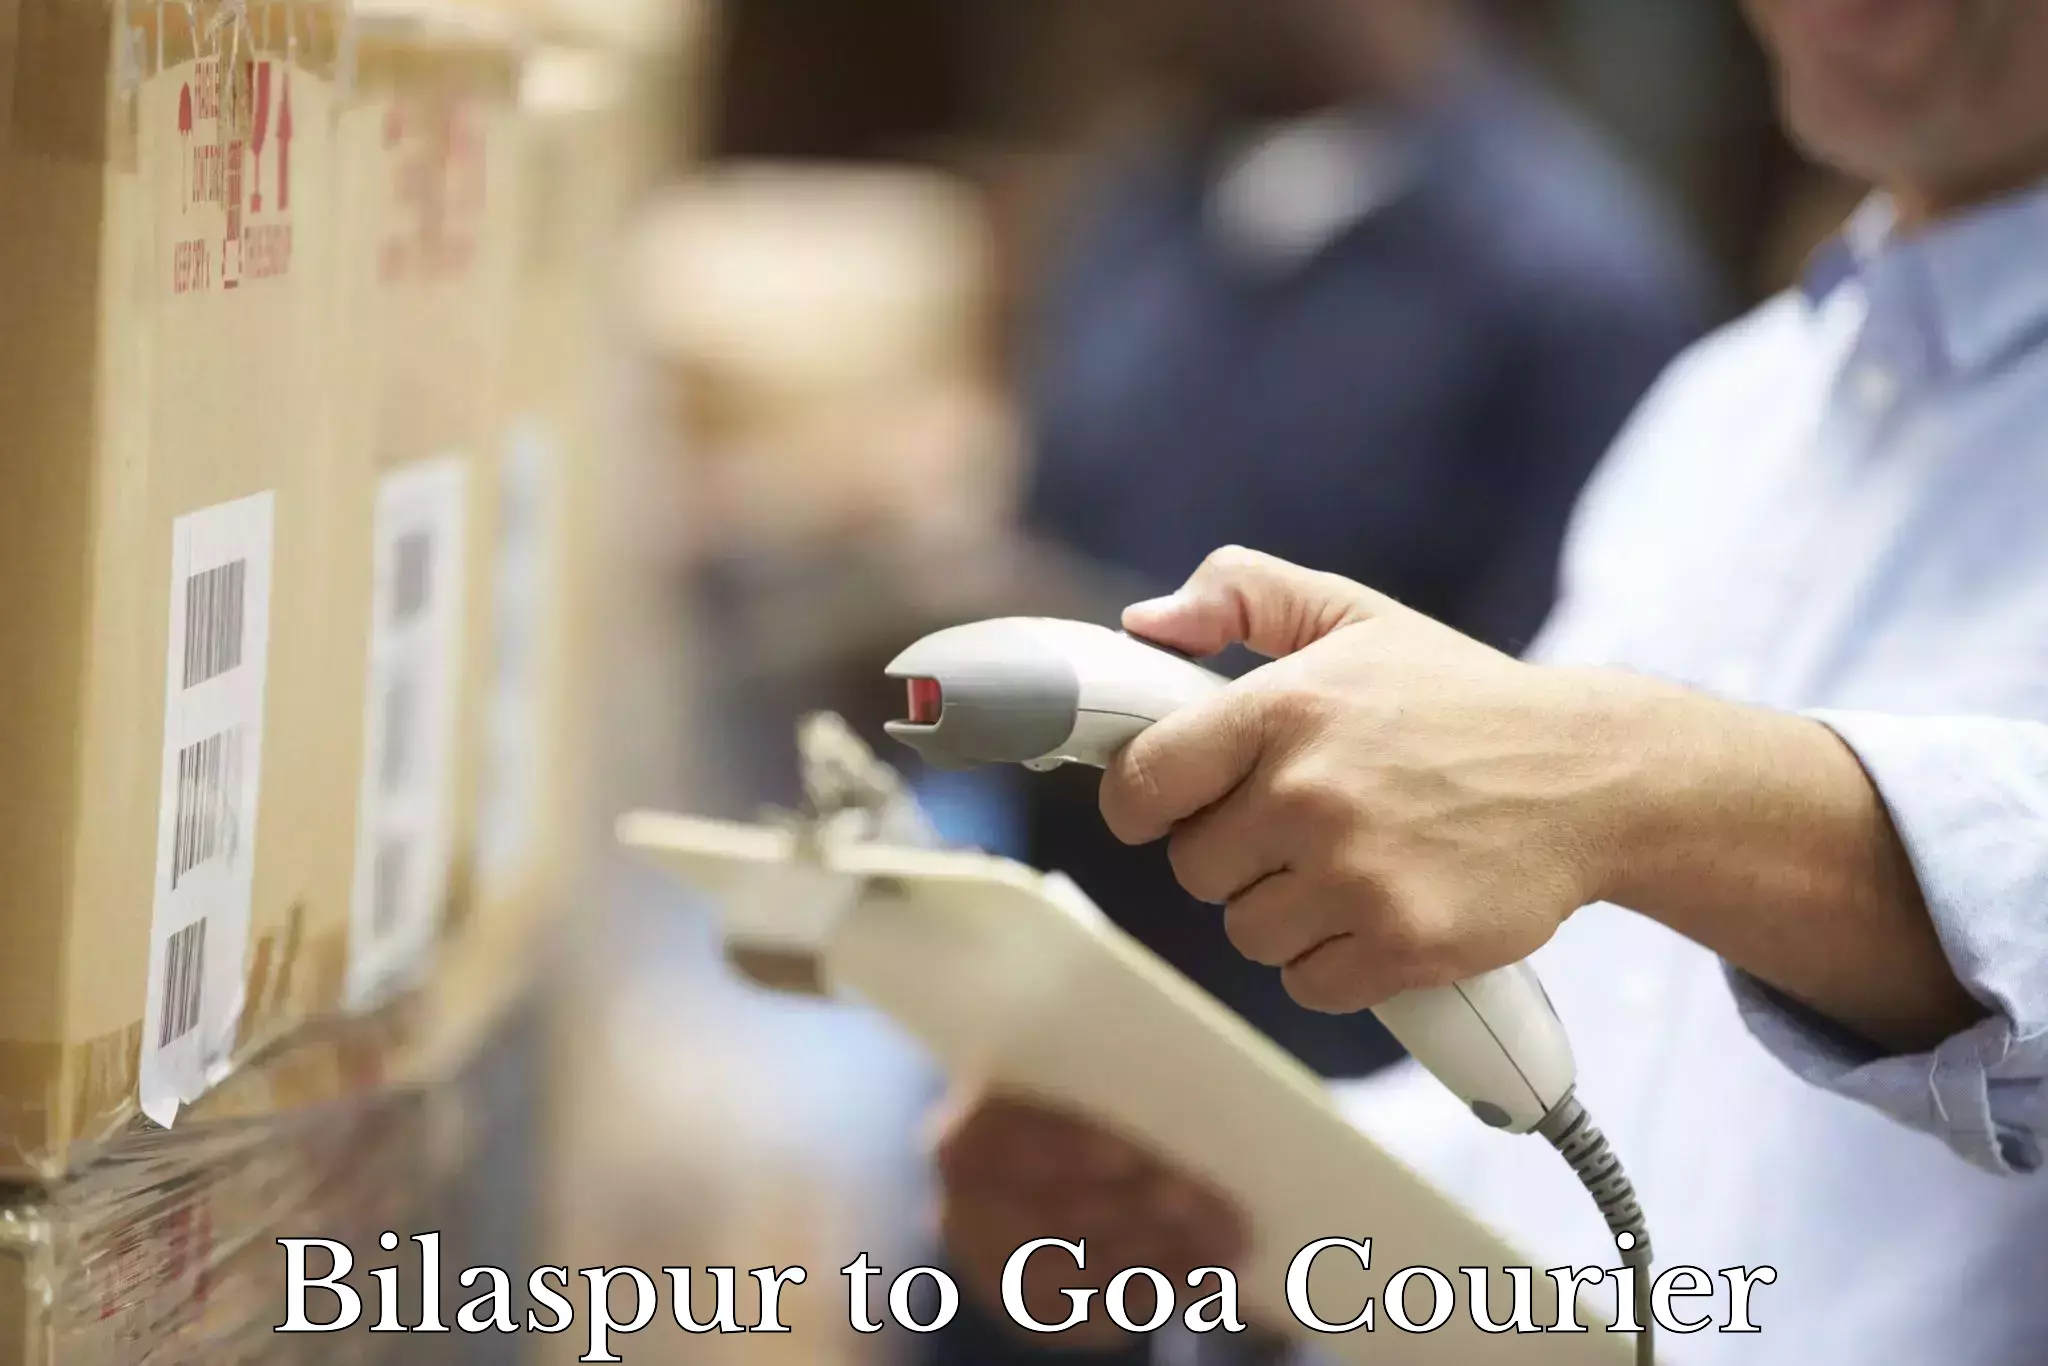 Cash on delivery service Bilaspur to Goa University